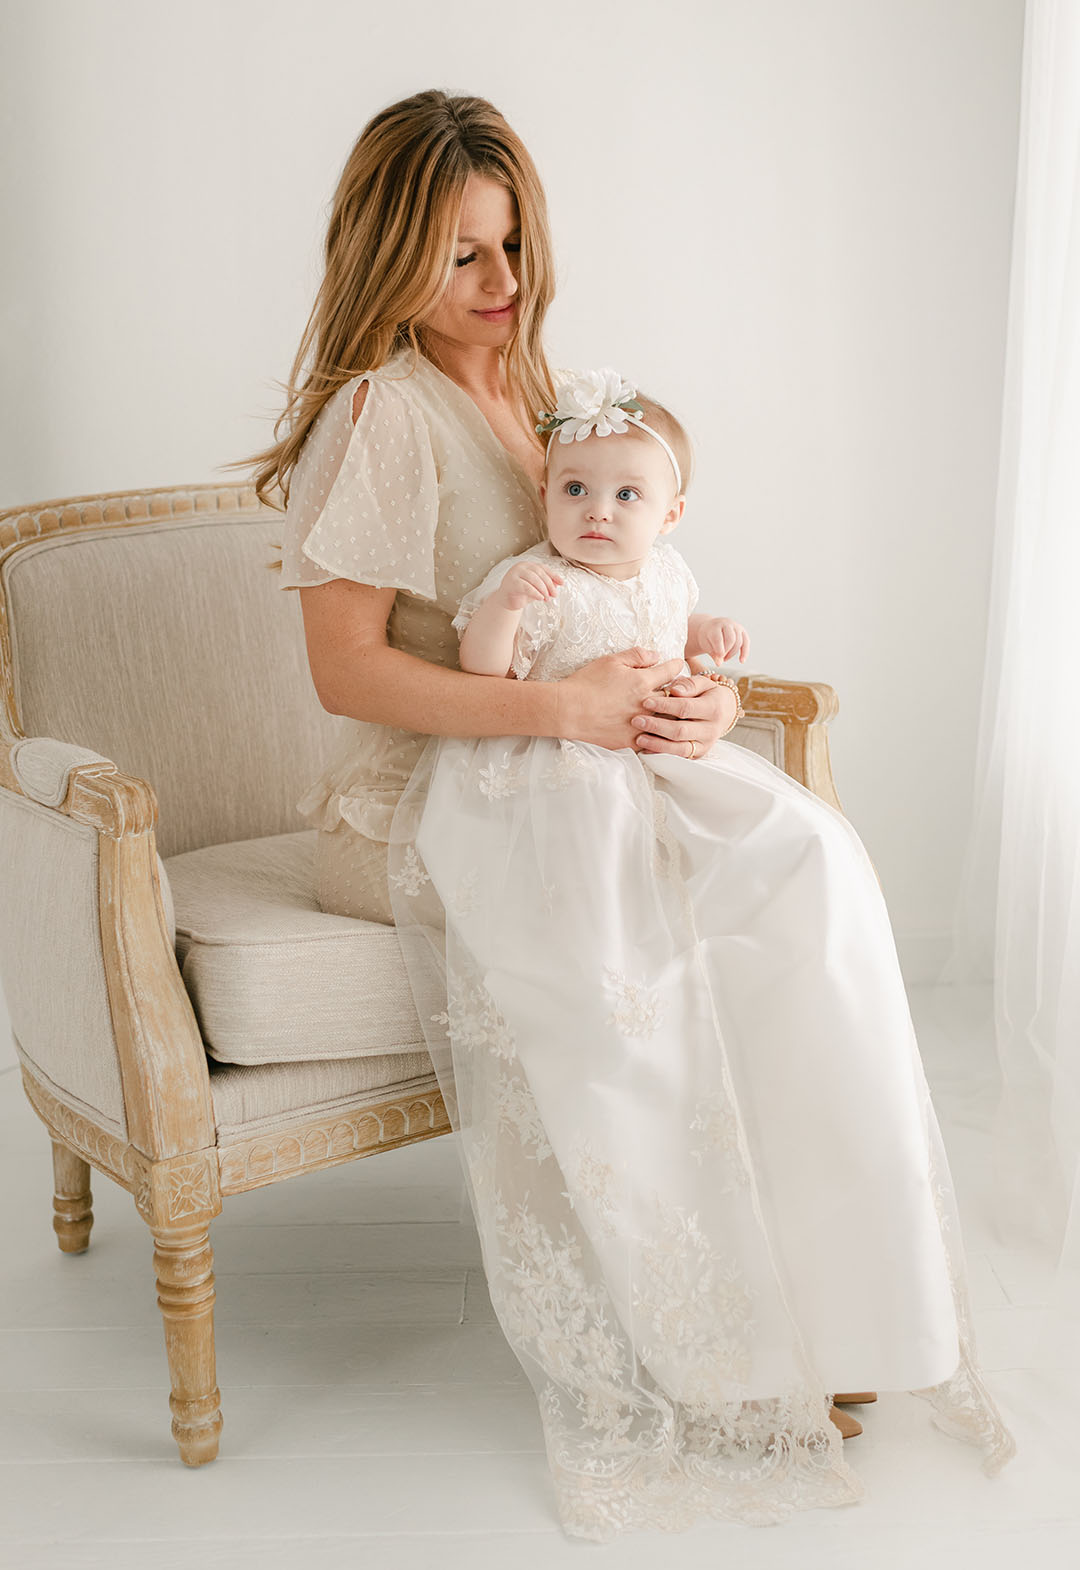 White Satin Unisex Christening Gown. Made in the UK.